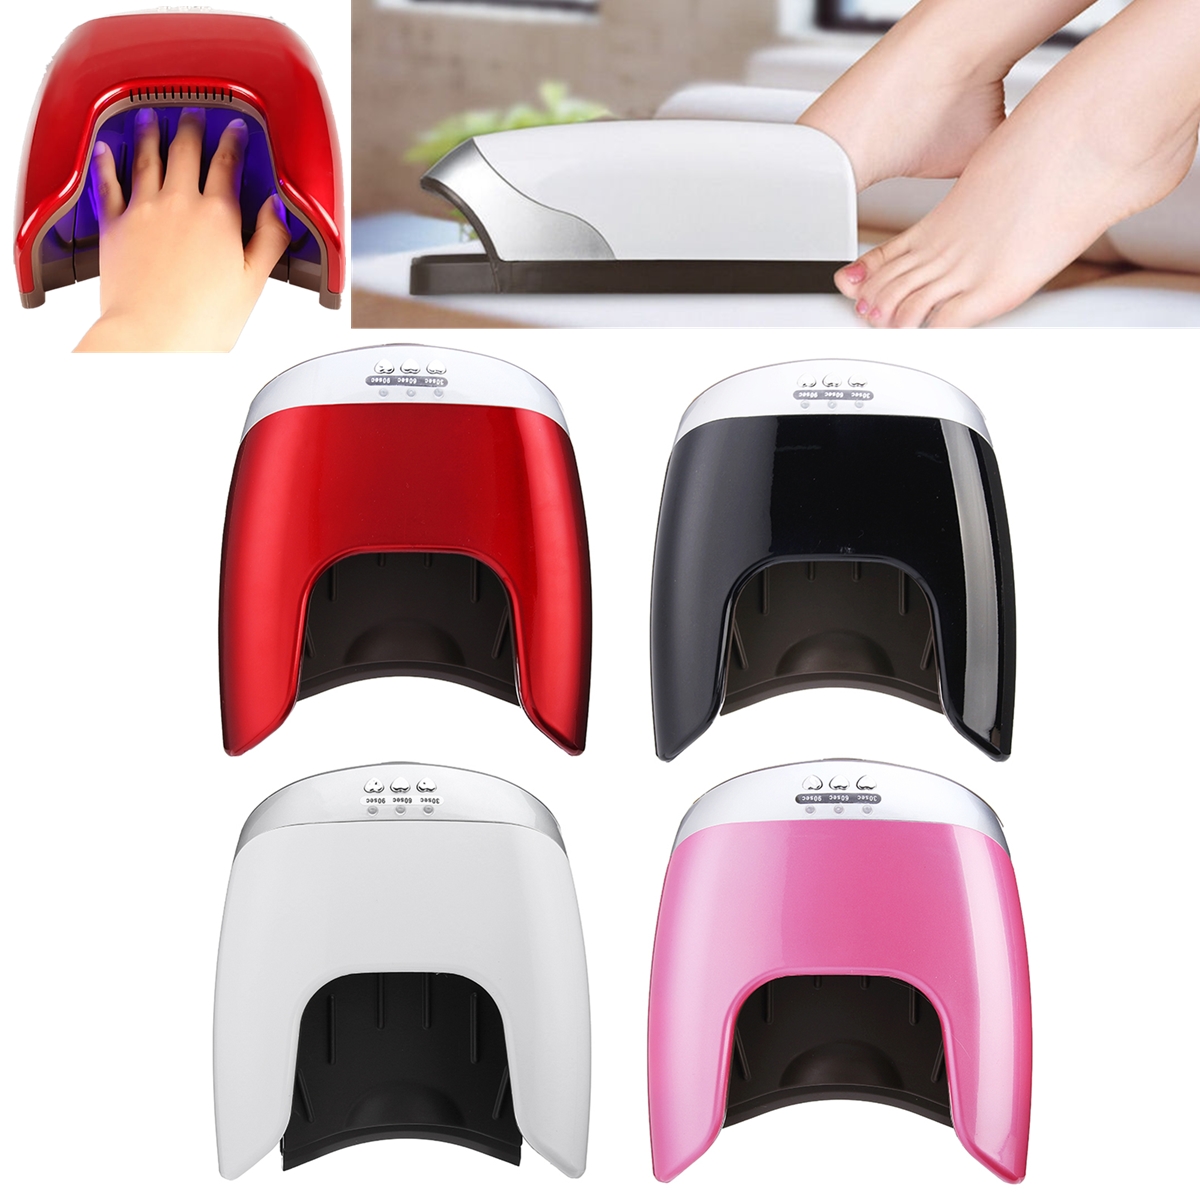 UV-Gel-Polish-LED-Nail-Lamp-Nail-Dryer-Curing-Light-with-Bottom-30s60s90s-Timer-LCD-Display-48W-1157031-1